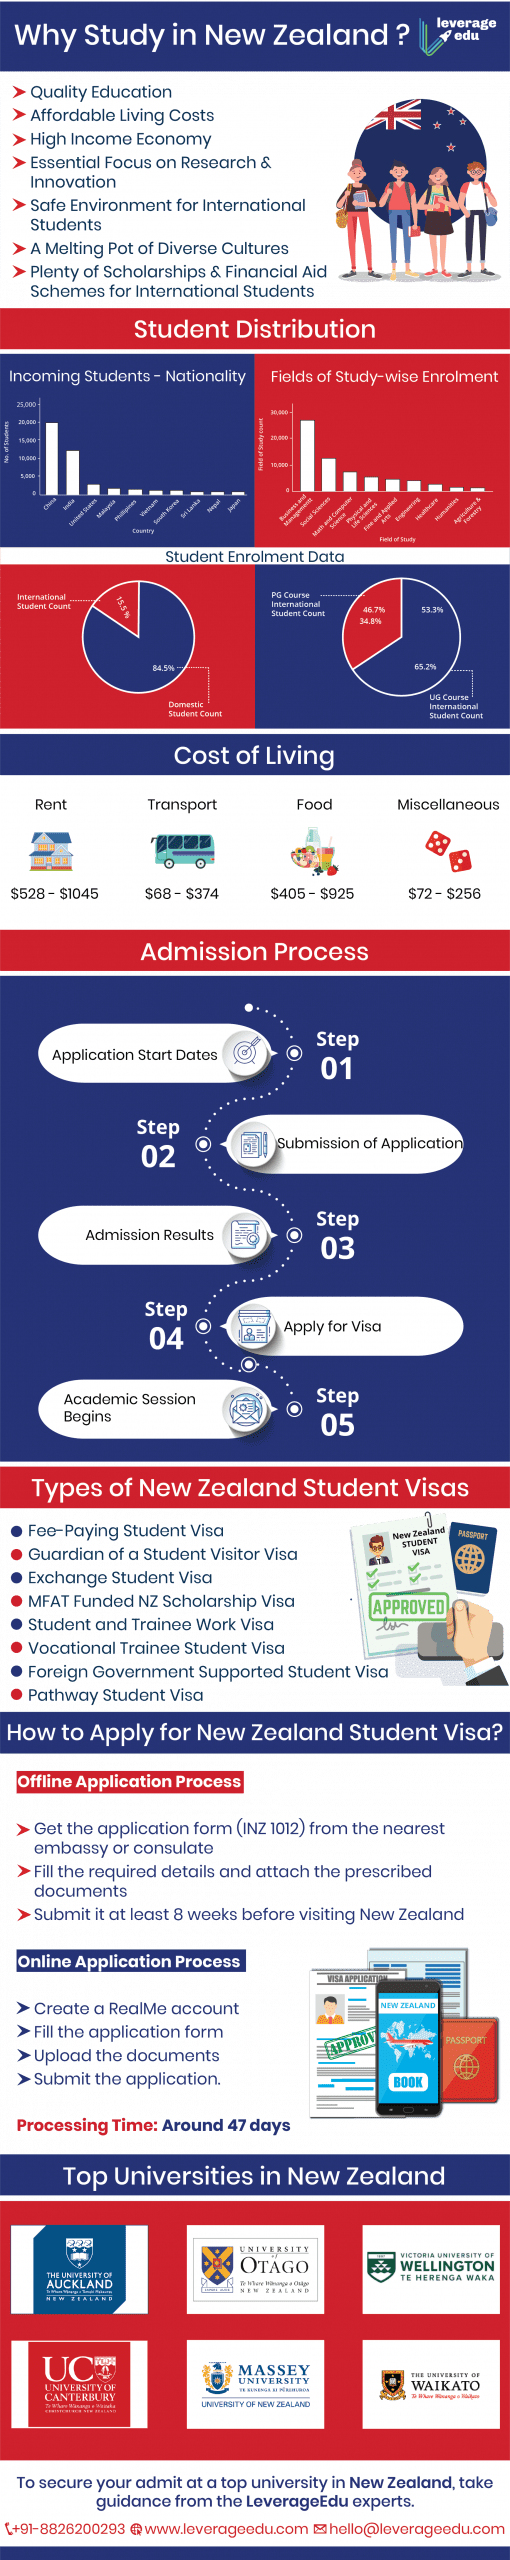 Study_in_New Zealand